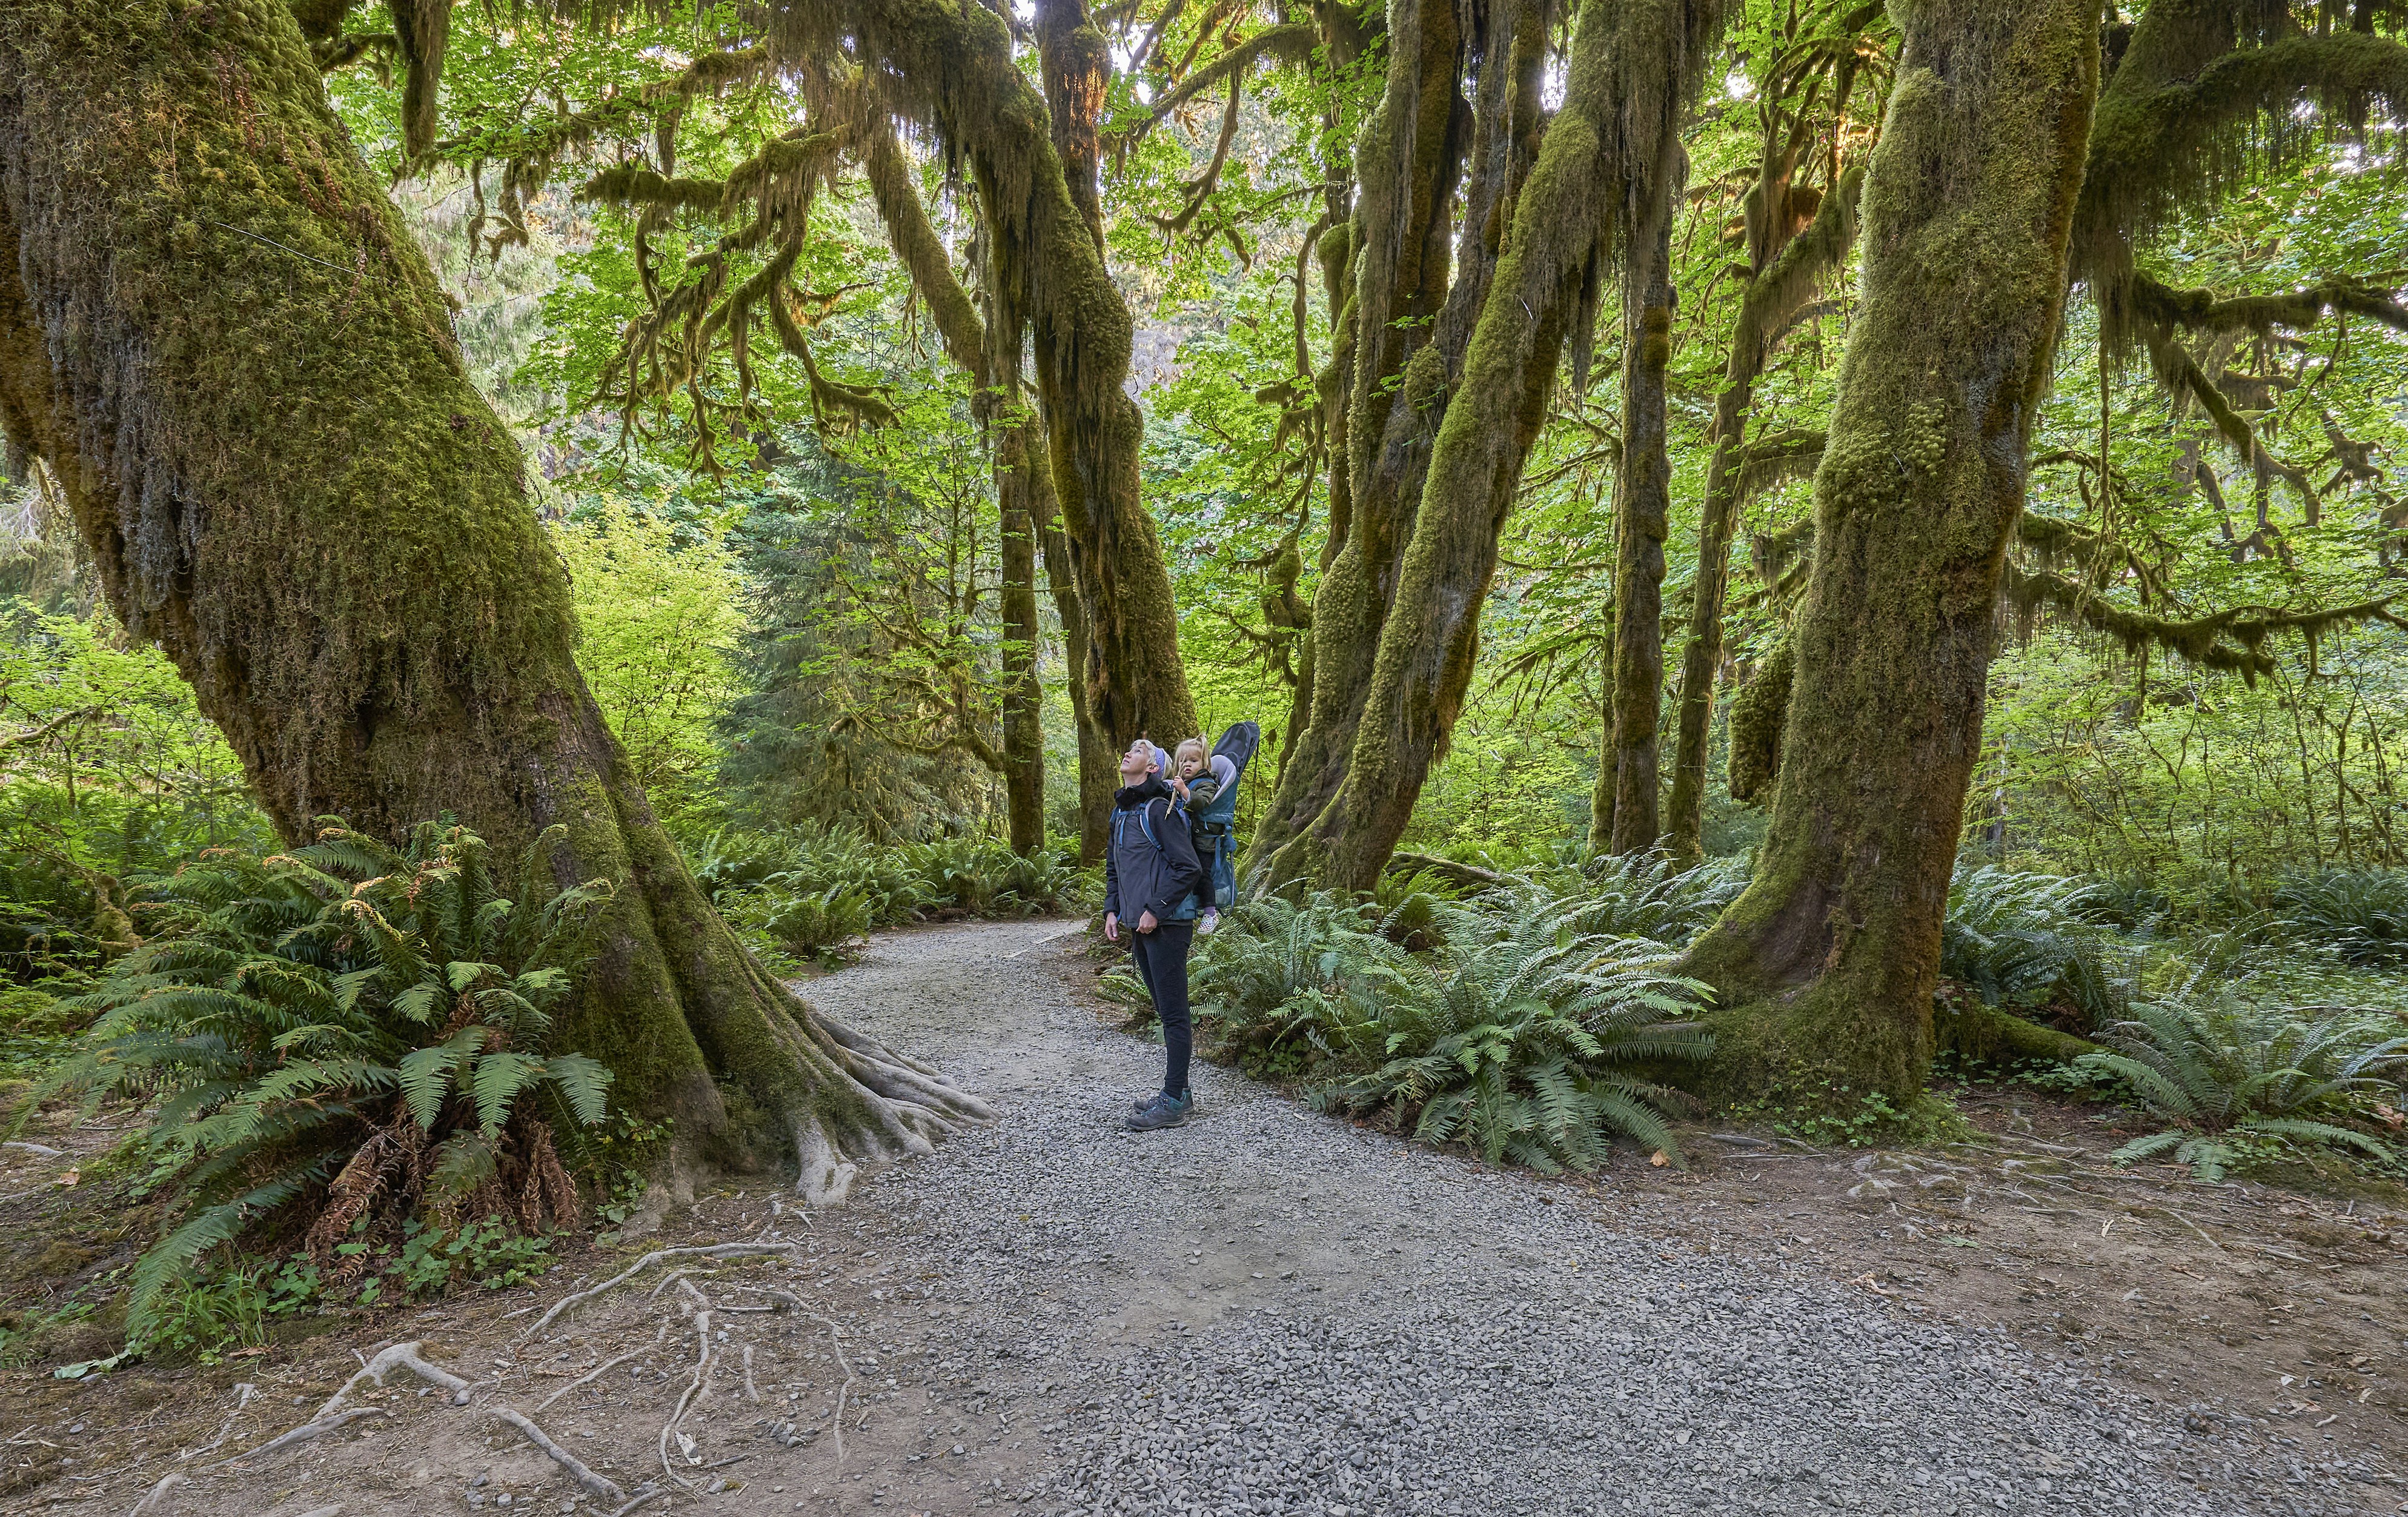 Mother and toddler daughter admiring the scenery of the Hoh Rainforest in Olympic National Park in Western Washington State USA.